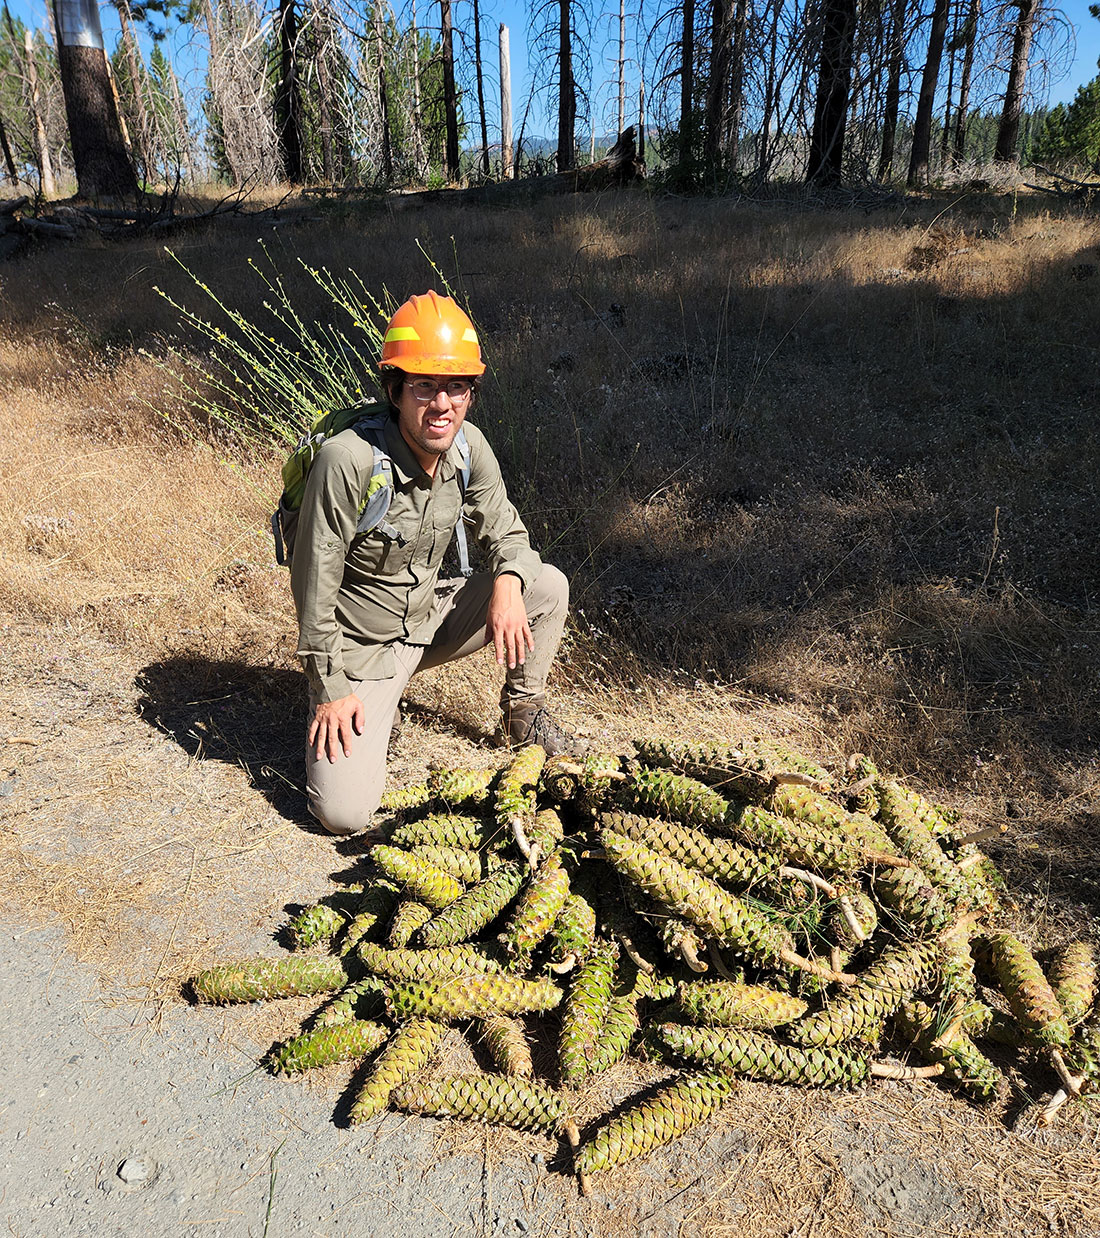 Luis Vidal, American Forests’ Northern California reforestation manager, kneels in front of sugar pine cones he collected in Eldorado National Forest in California. These cones are essential for post- fire restoration and were collected shortly before the Mosquito Fire burned close to their parent trees.